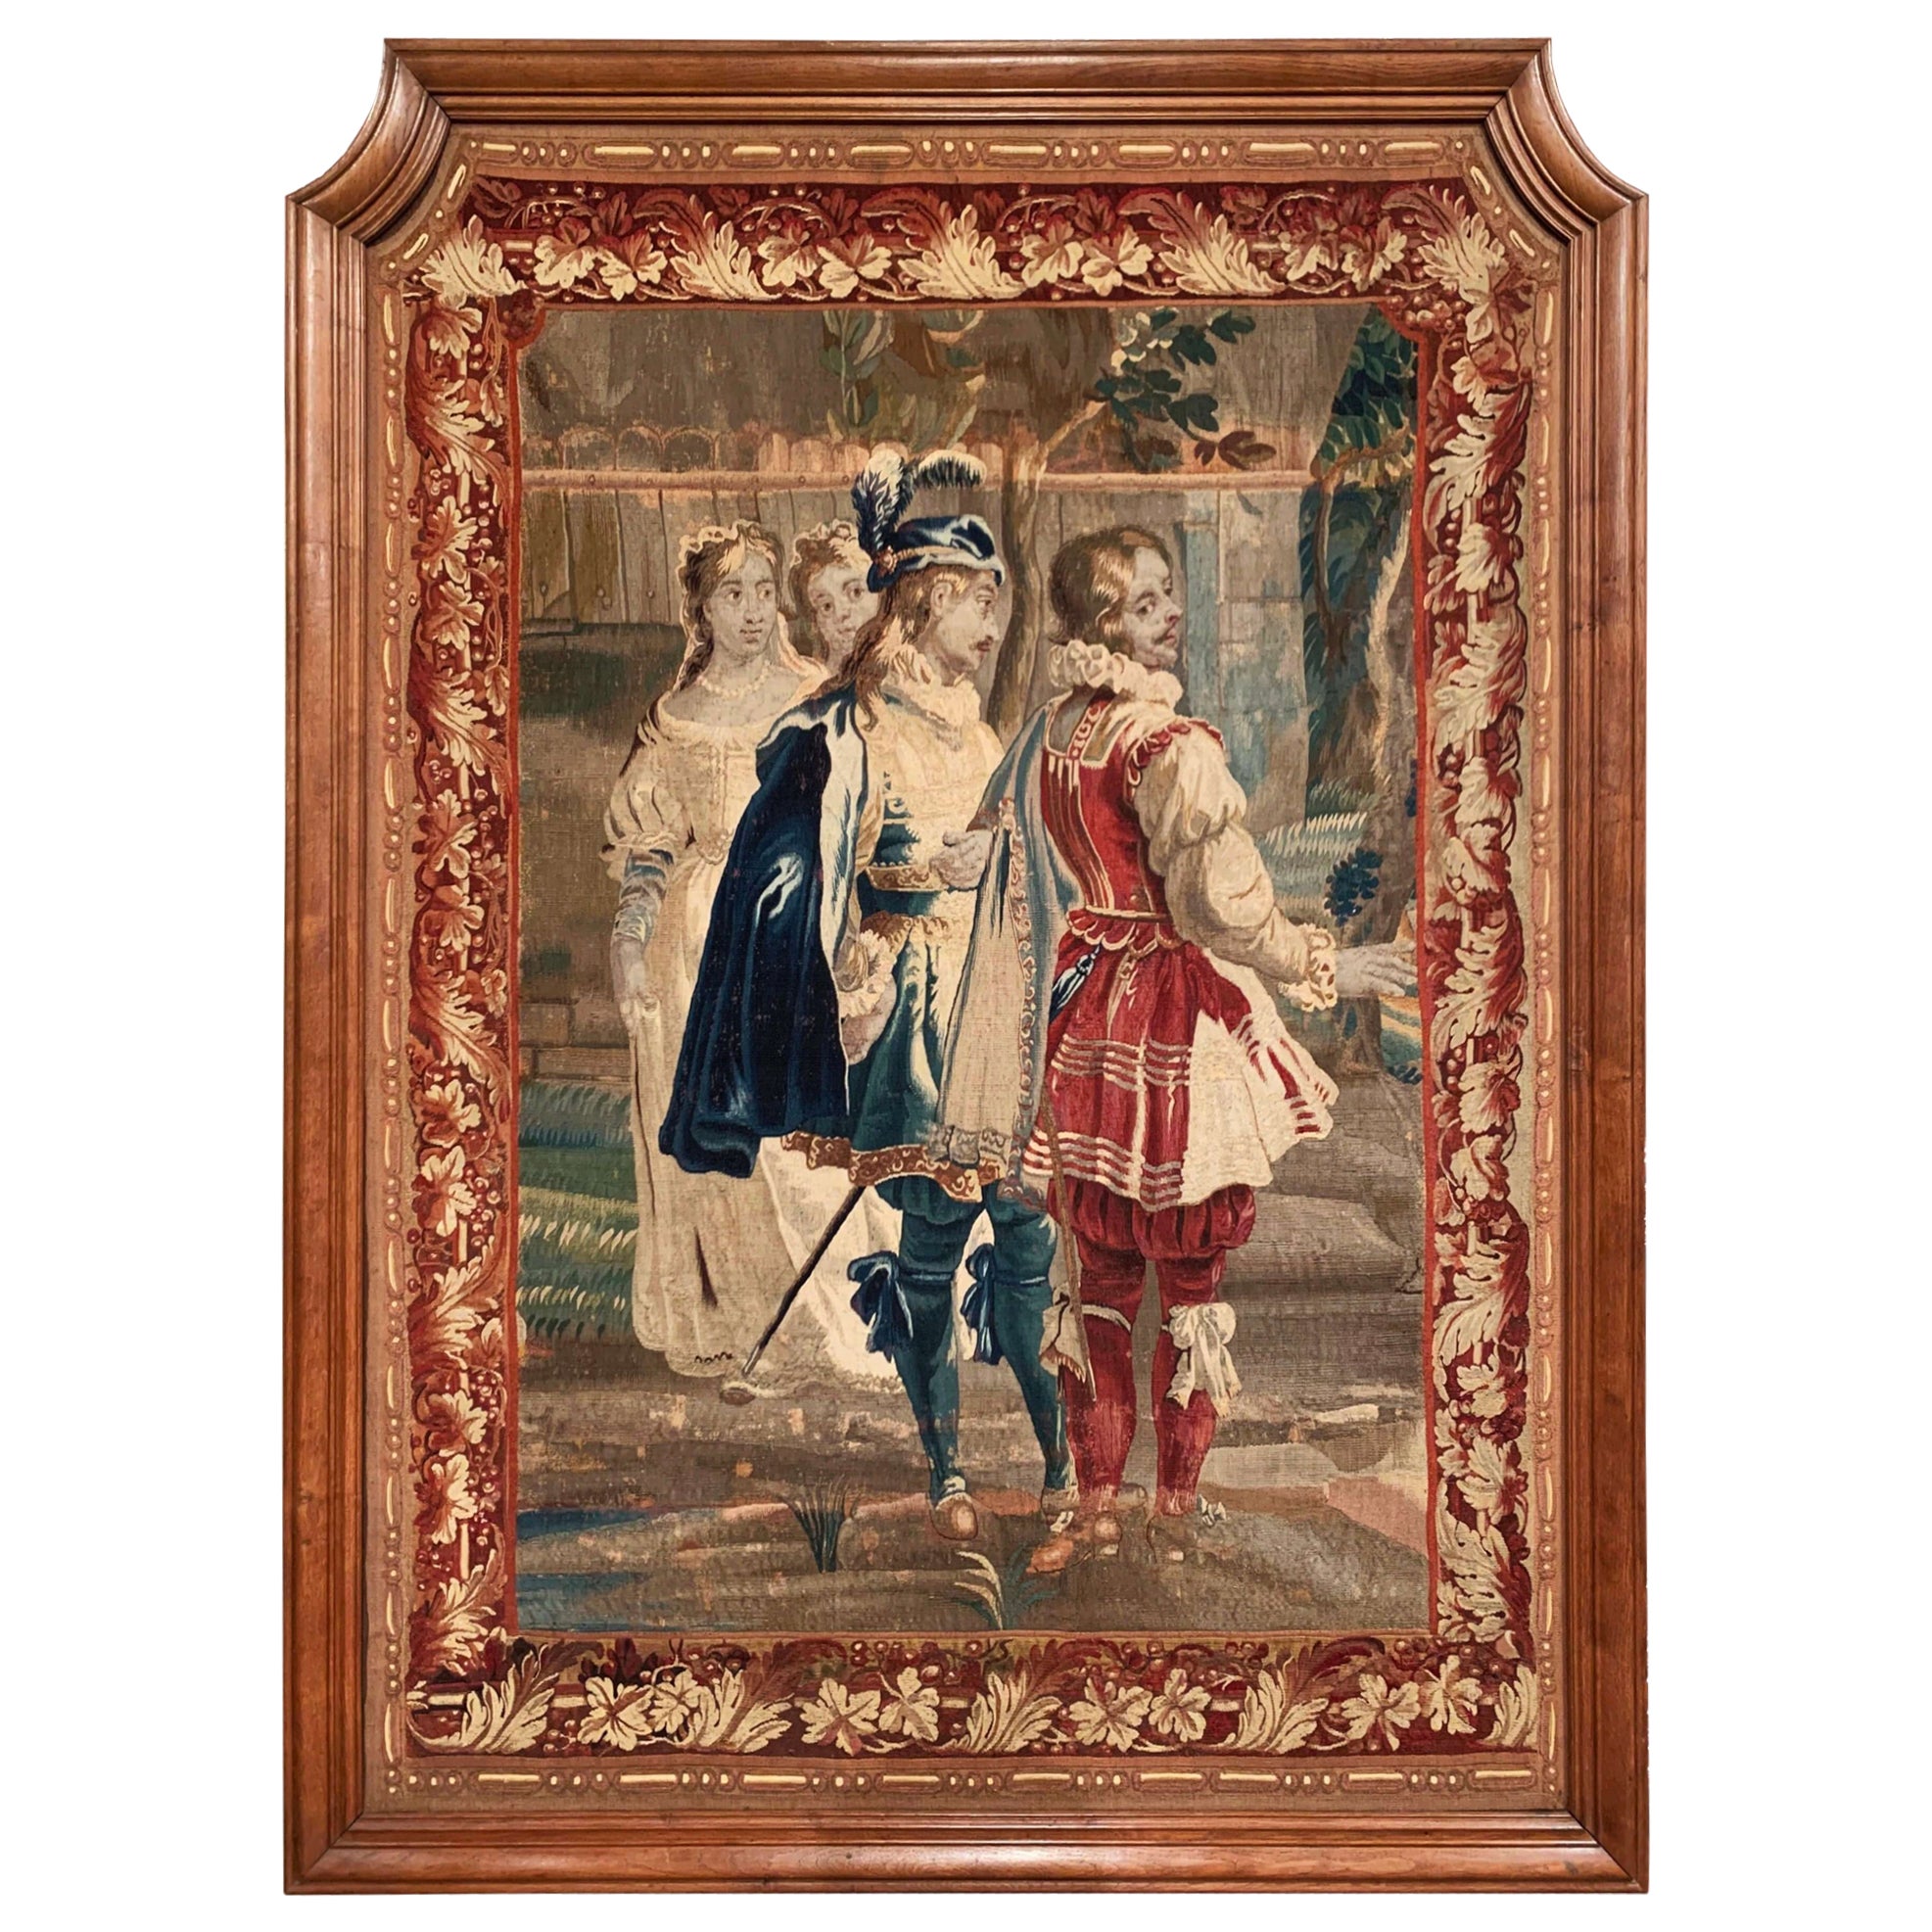 18th Century French Handwoven Aubusson Panel Tapestry in Original Oak Frame